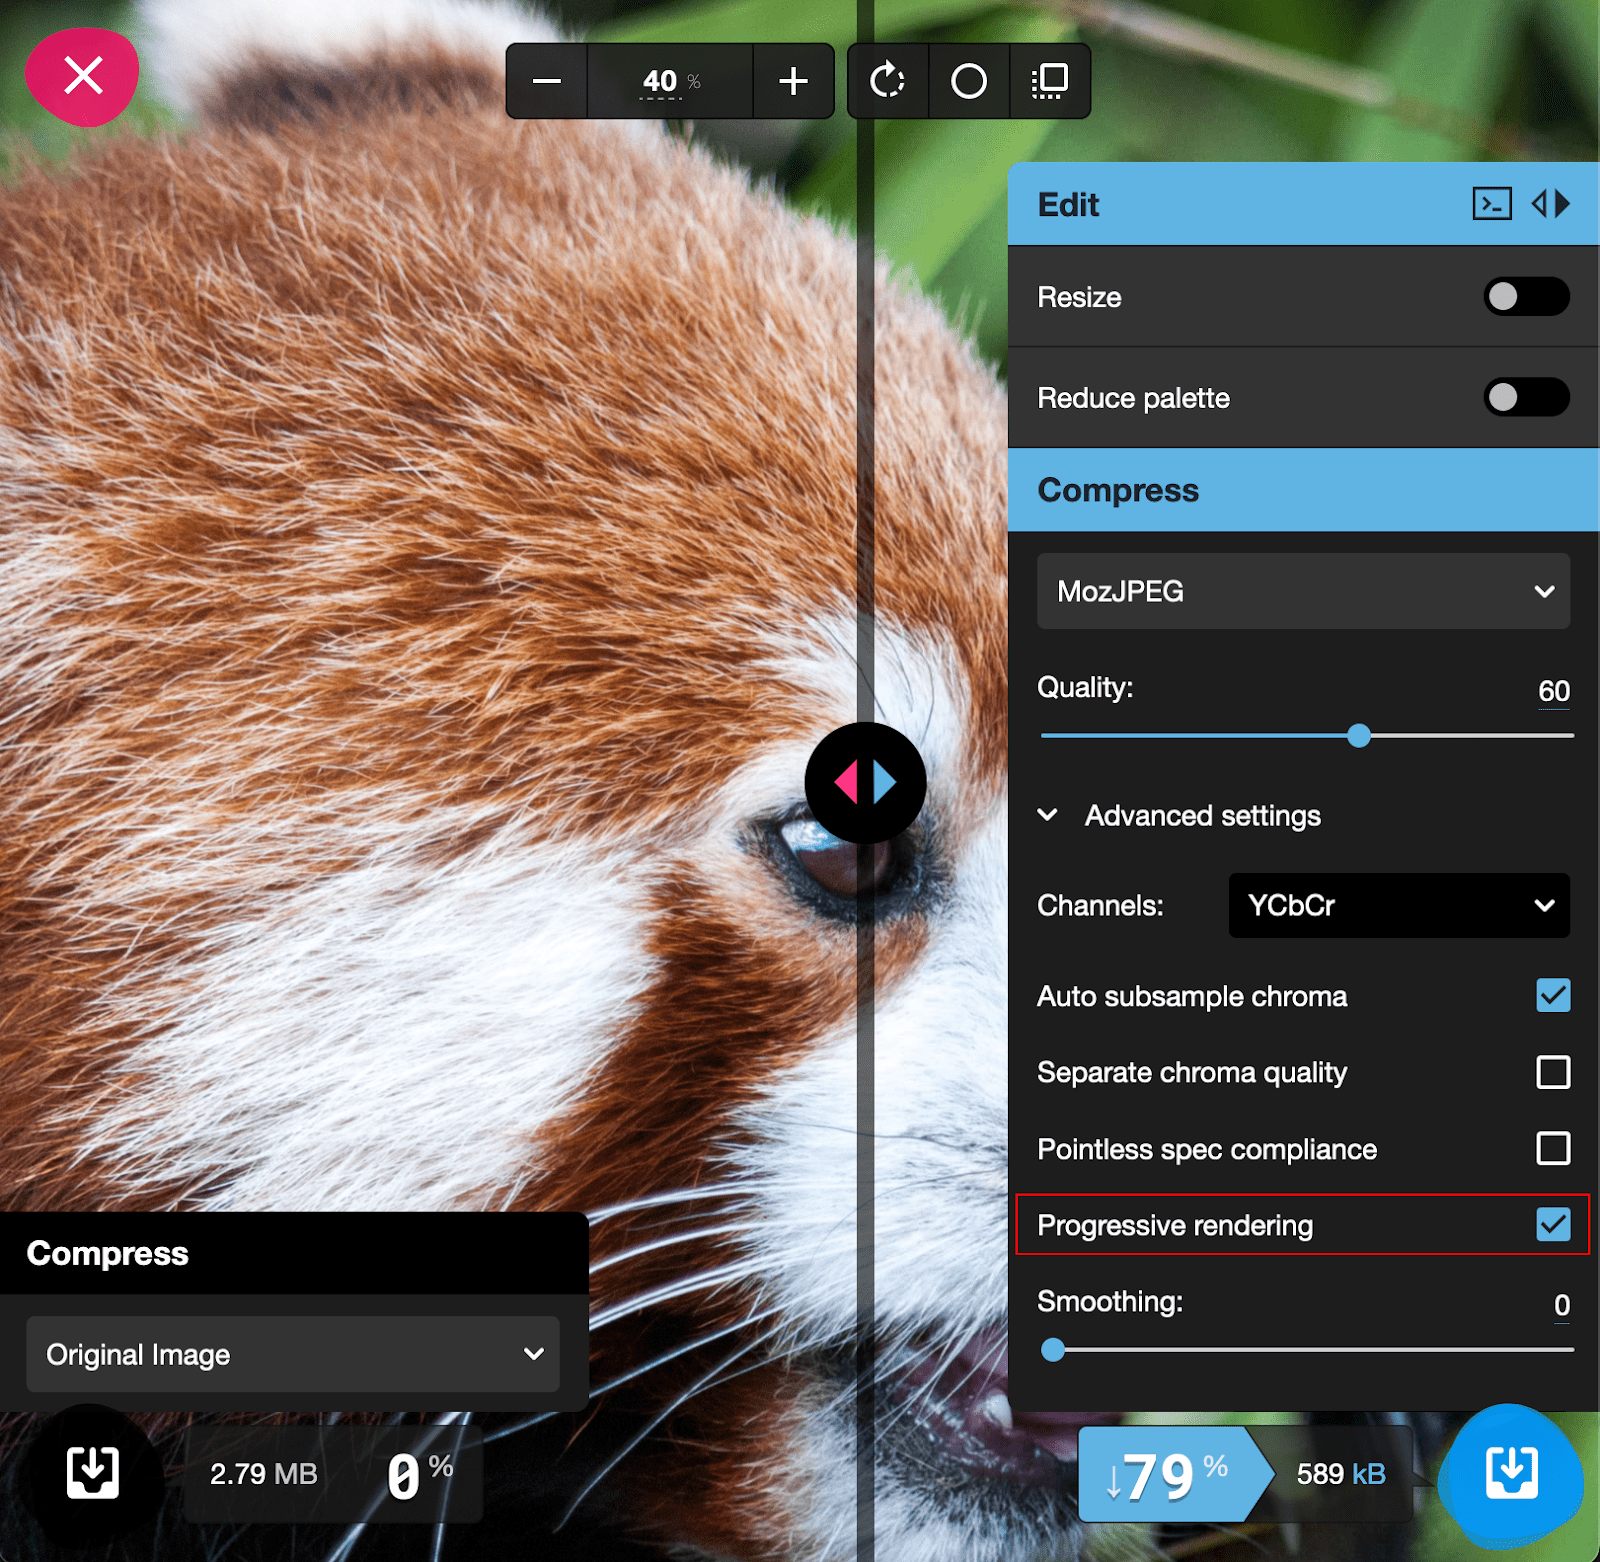 The Squoosh settings panel, with the progressive rendering setting highlighted.